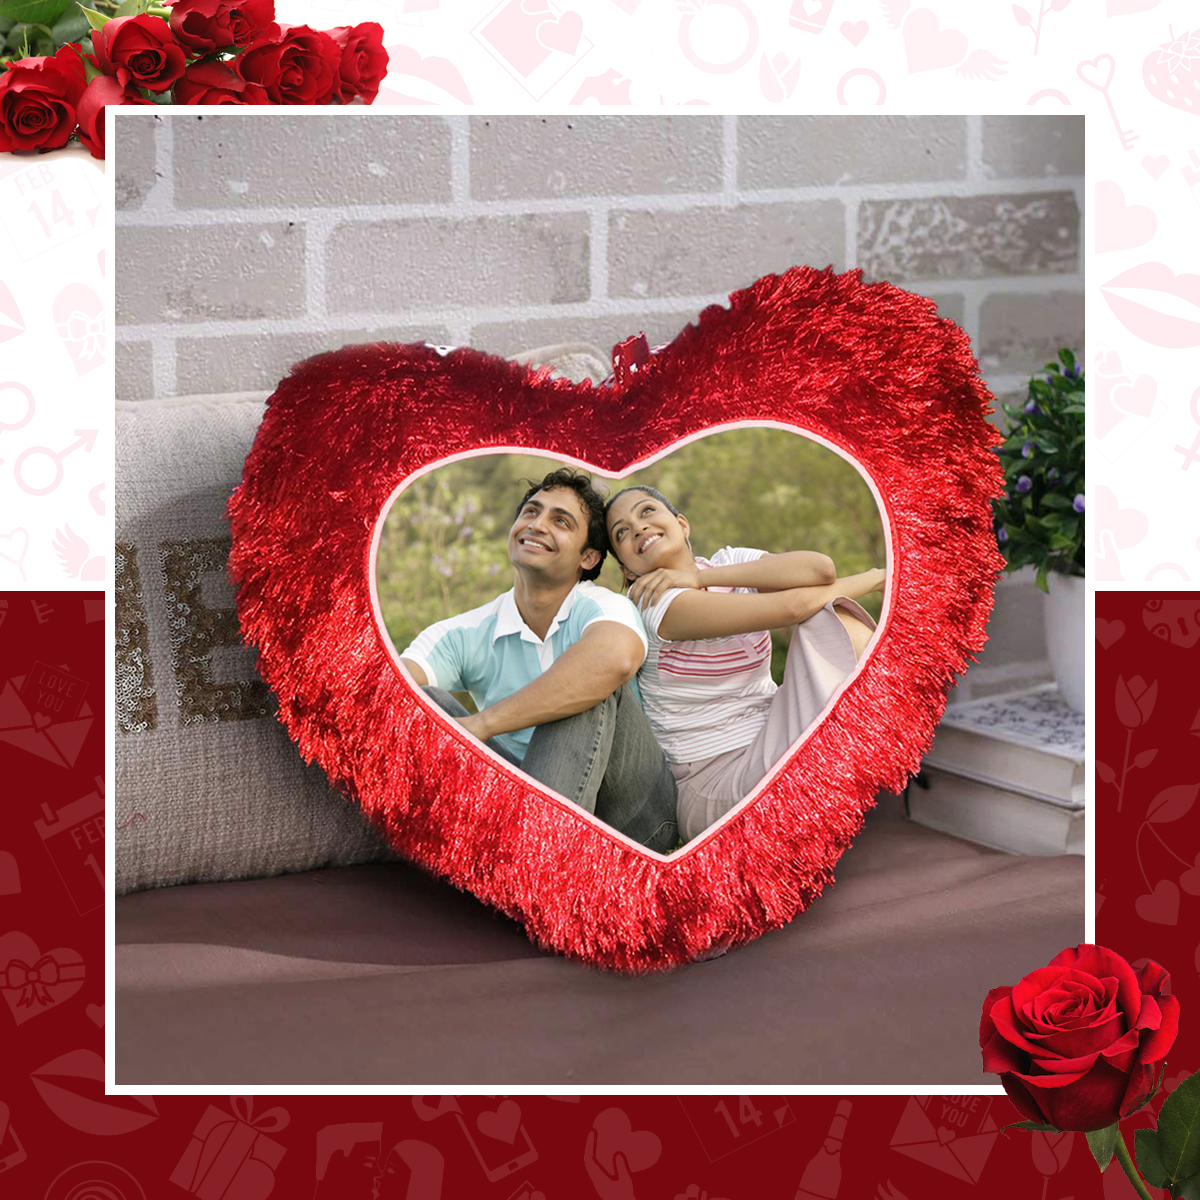 Blooming Love Valentine's Day Surprise: Gift/Send Valentine's Day Gifts  Online JVS1275007 |IGP.com